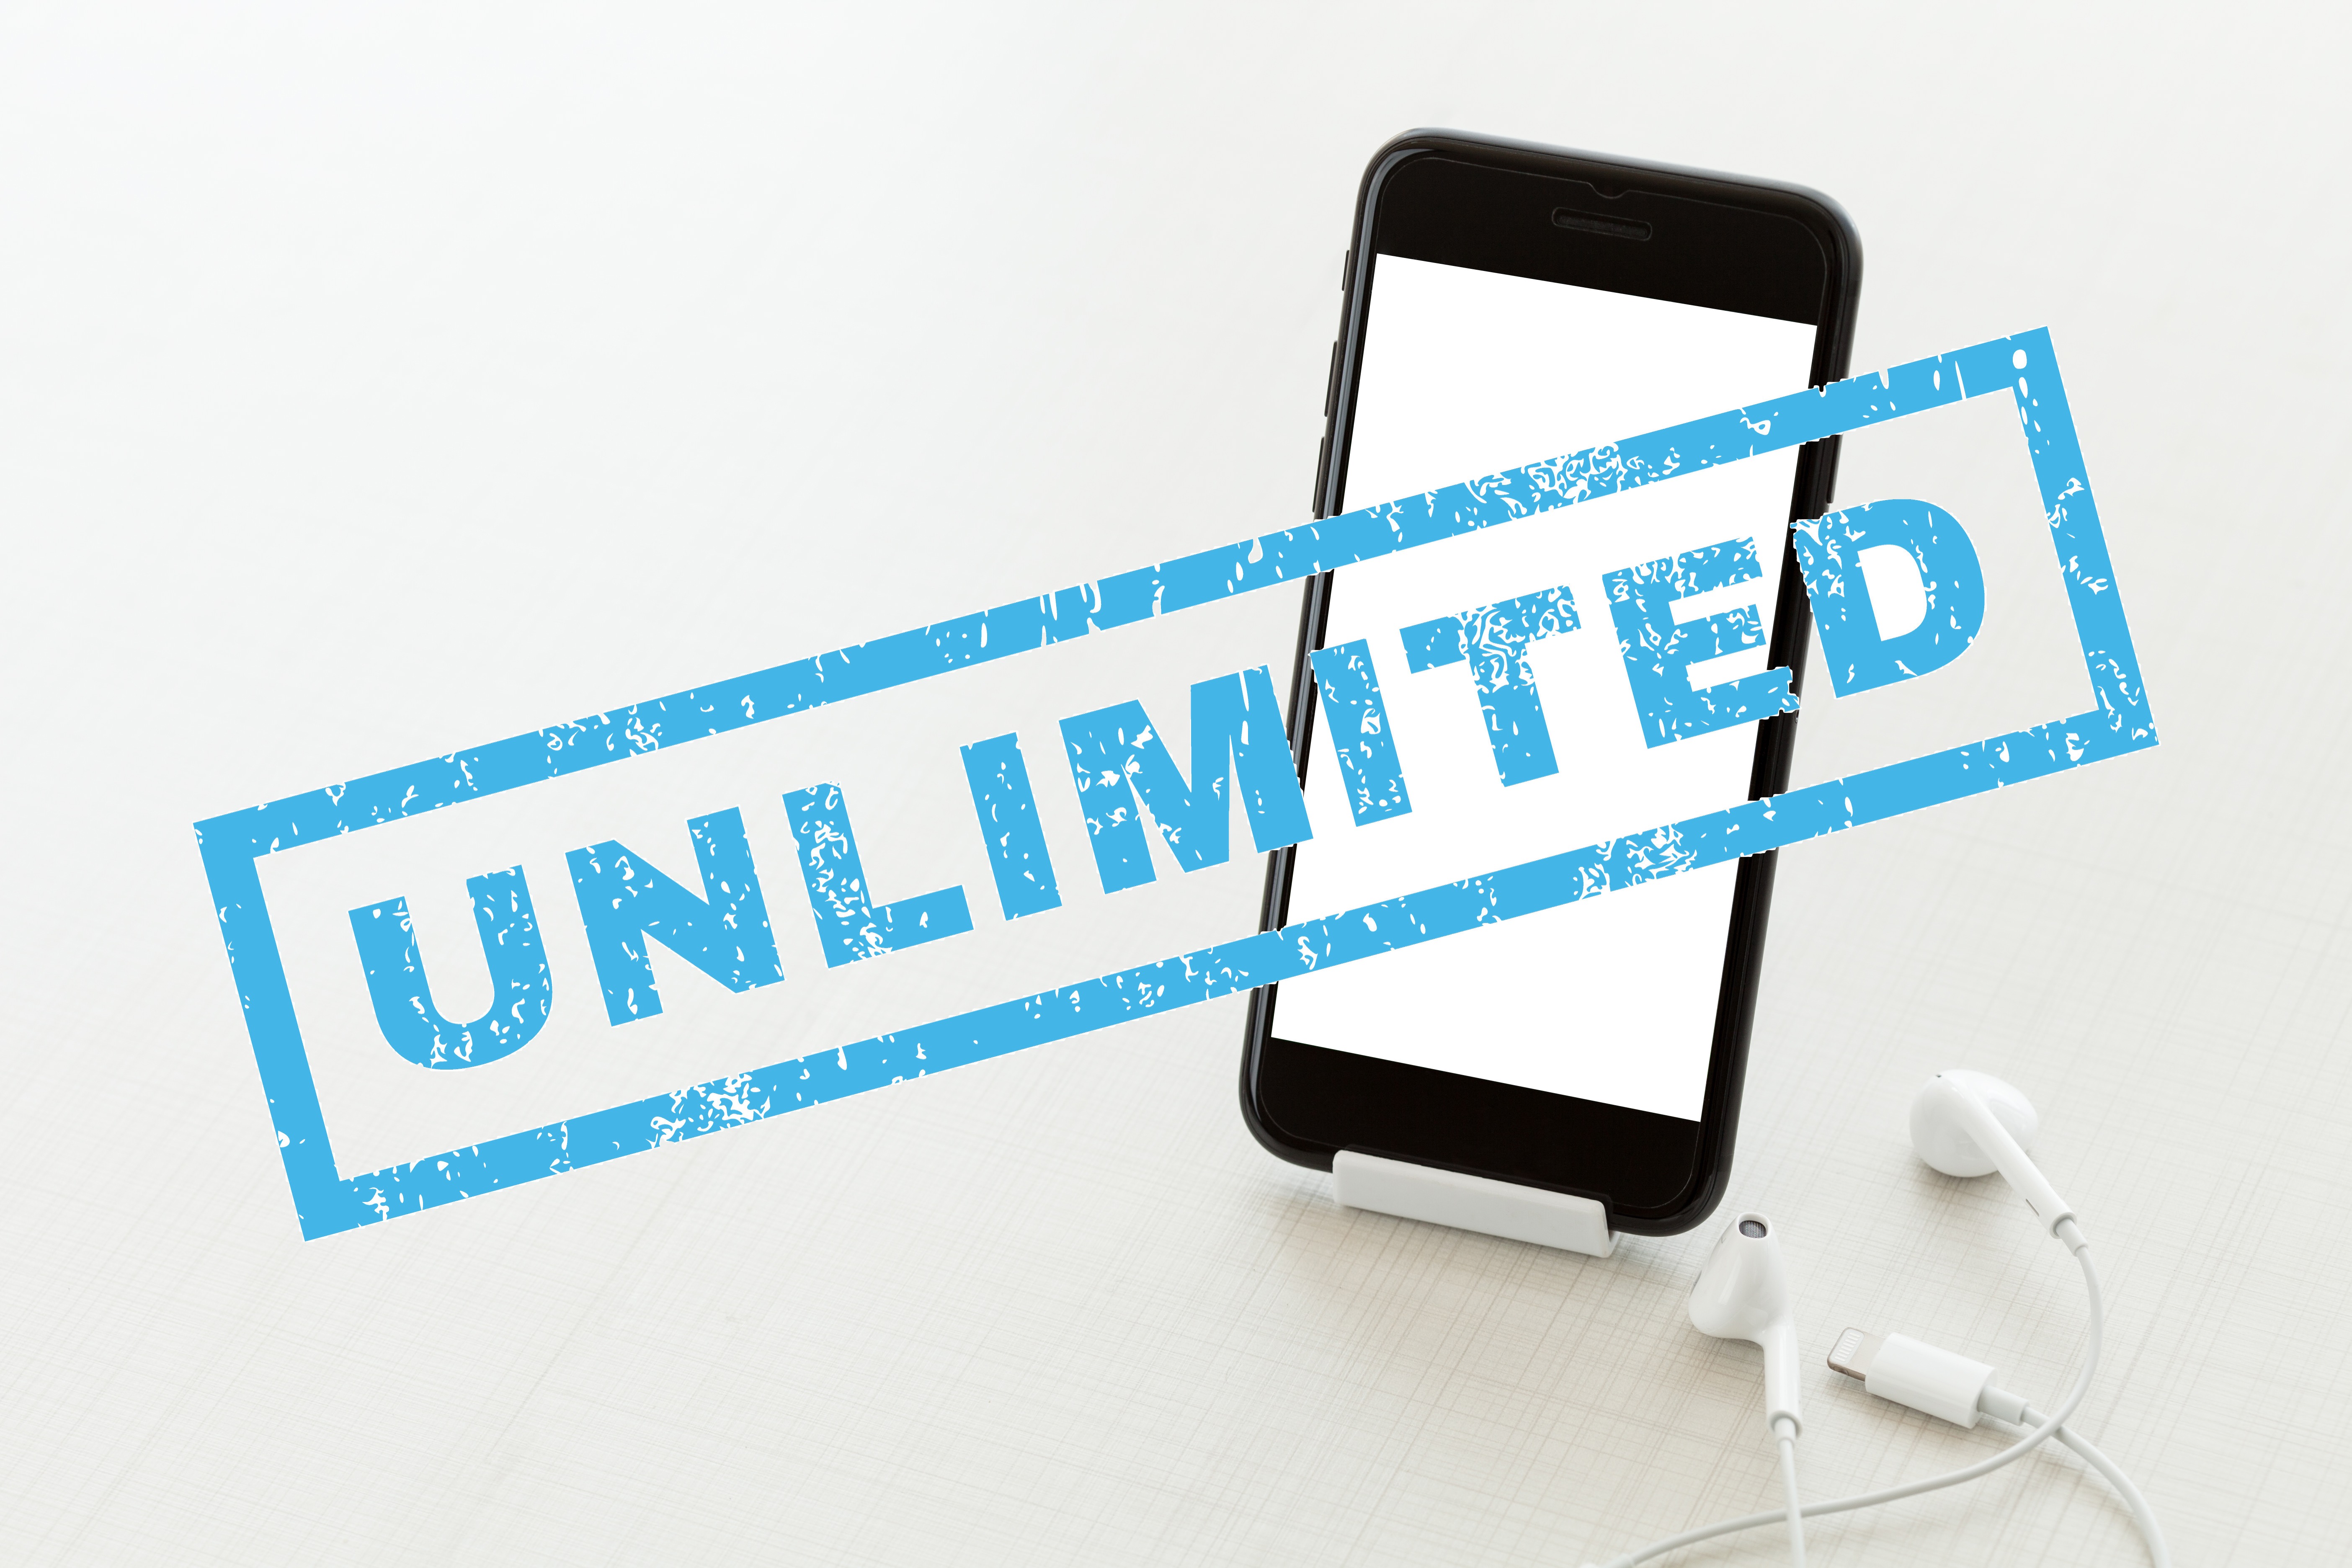 How the two AT&T Unlimited plans compare.